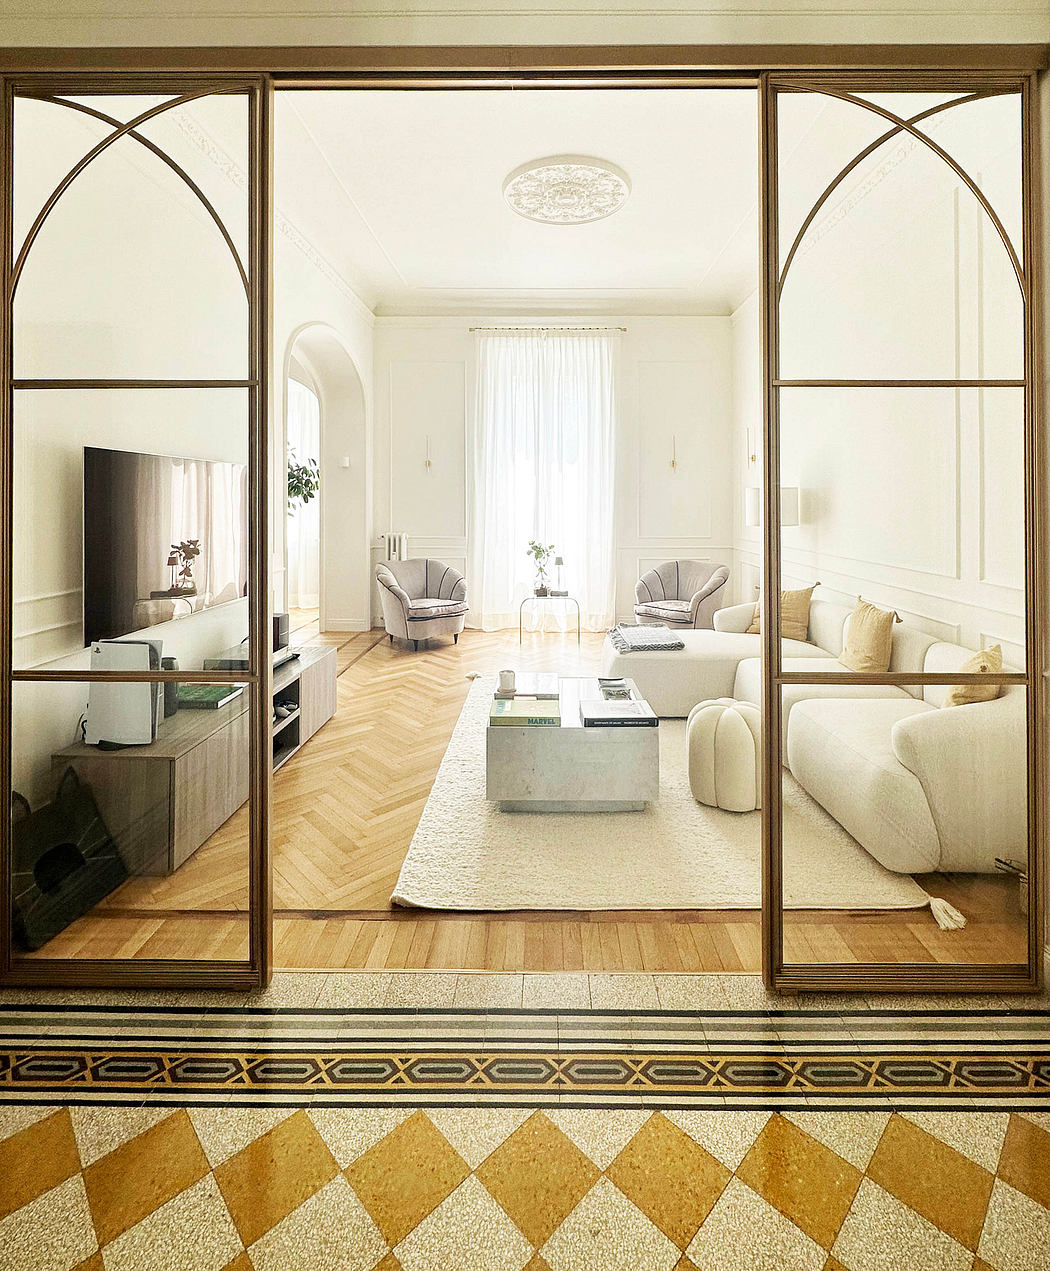 Elegant living room viewed through arched glass doors with patterned floor border.